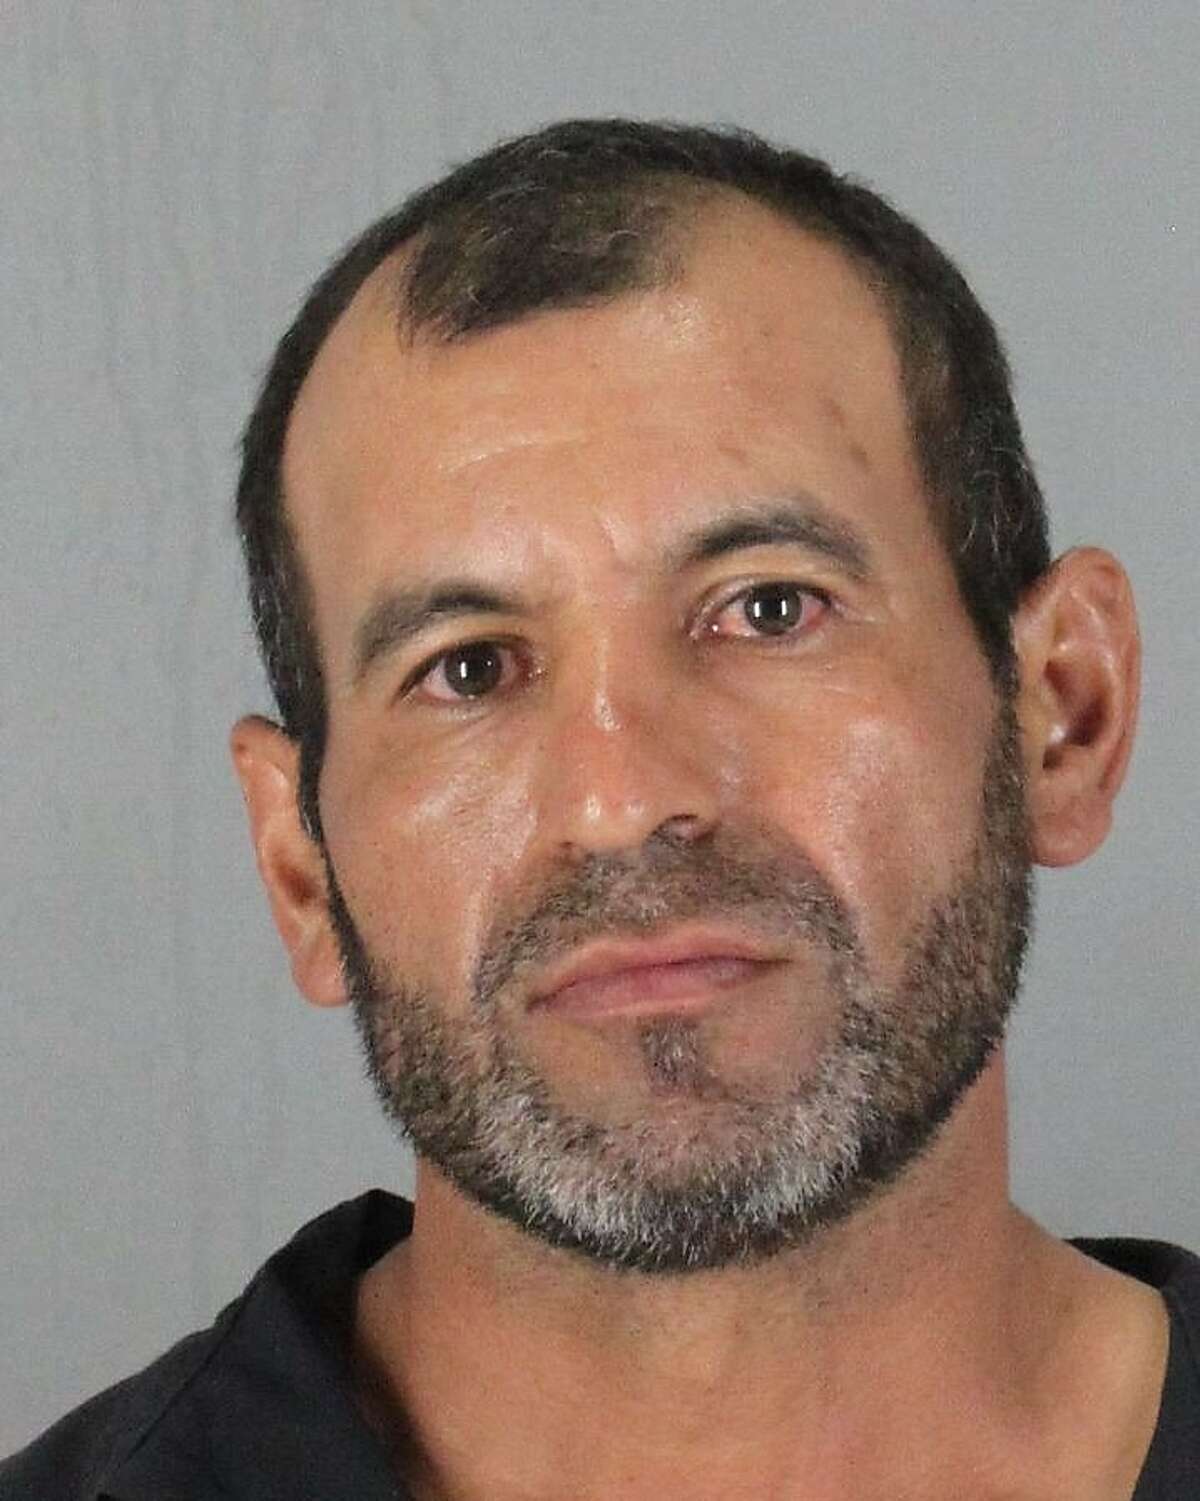 Juan Perez, 41, of East Palo Alto, pleaded not guilty to five felonies Wednesday, July 16 after he allegedly beat an 89-year-old priest with his own cane